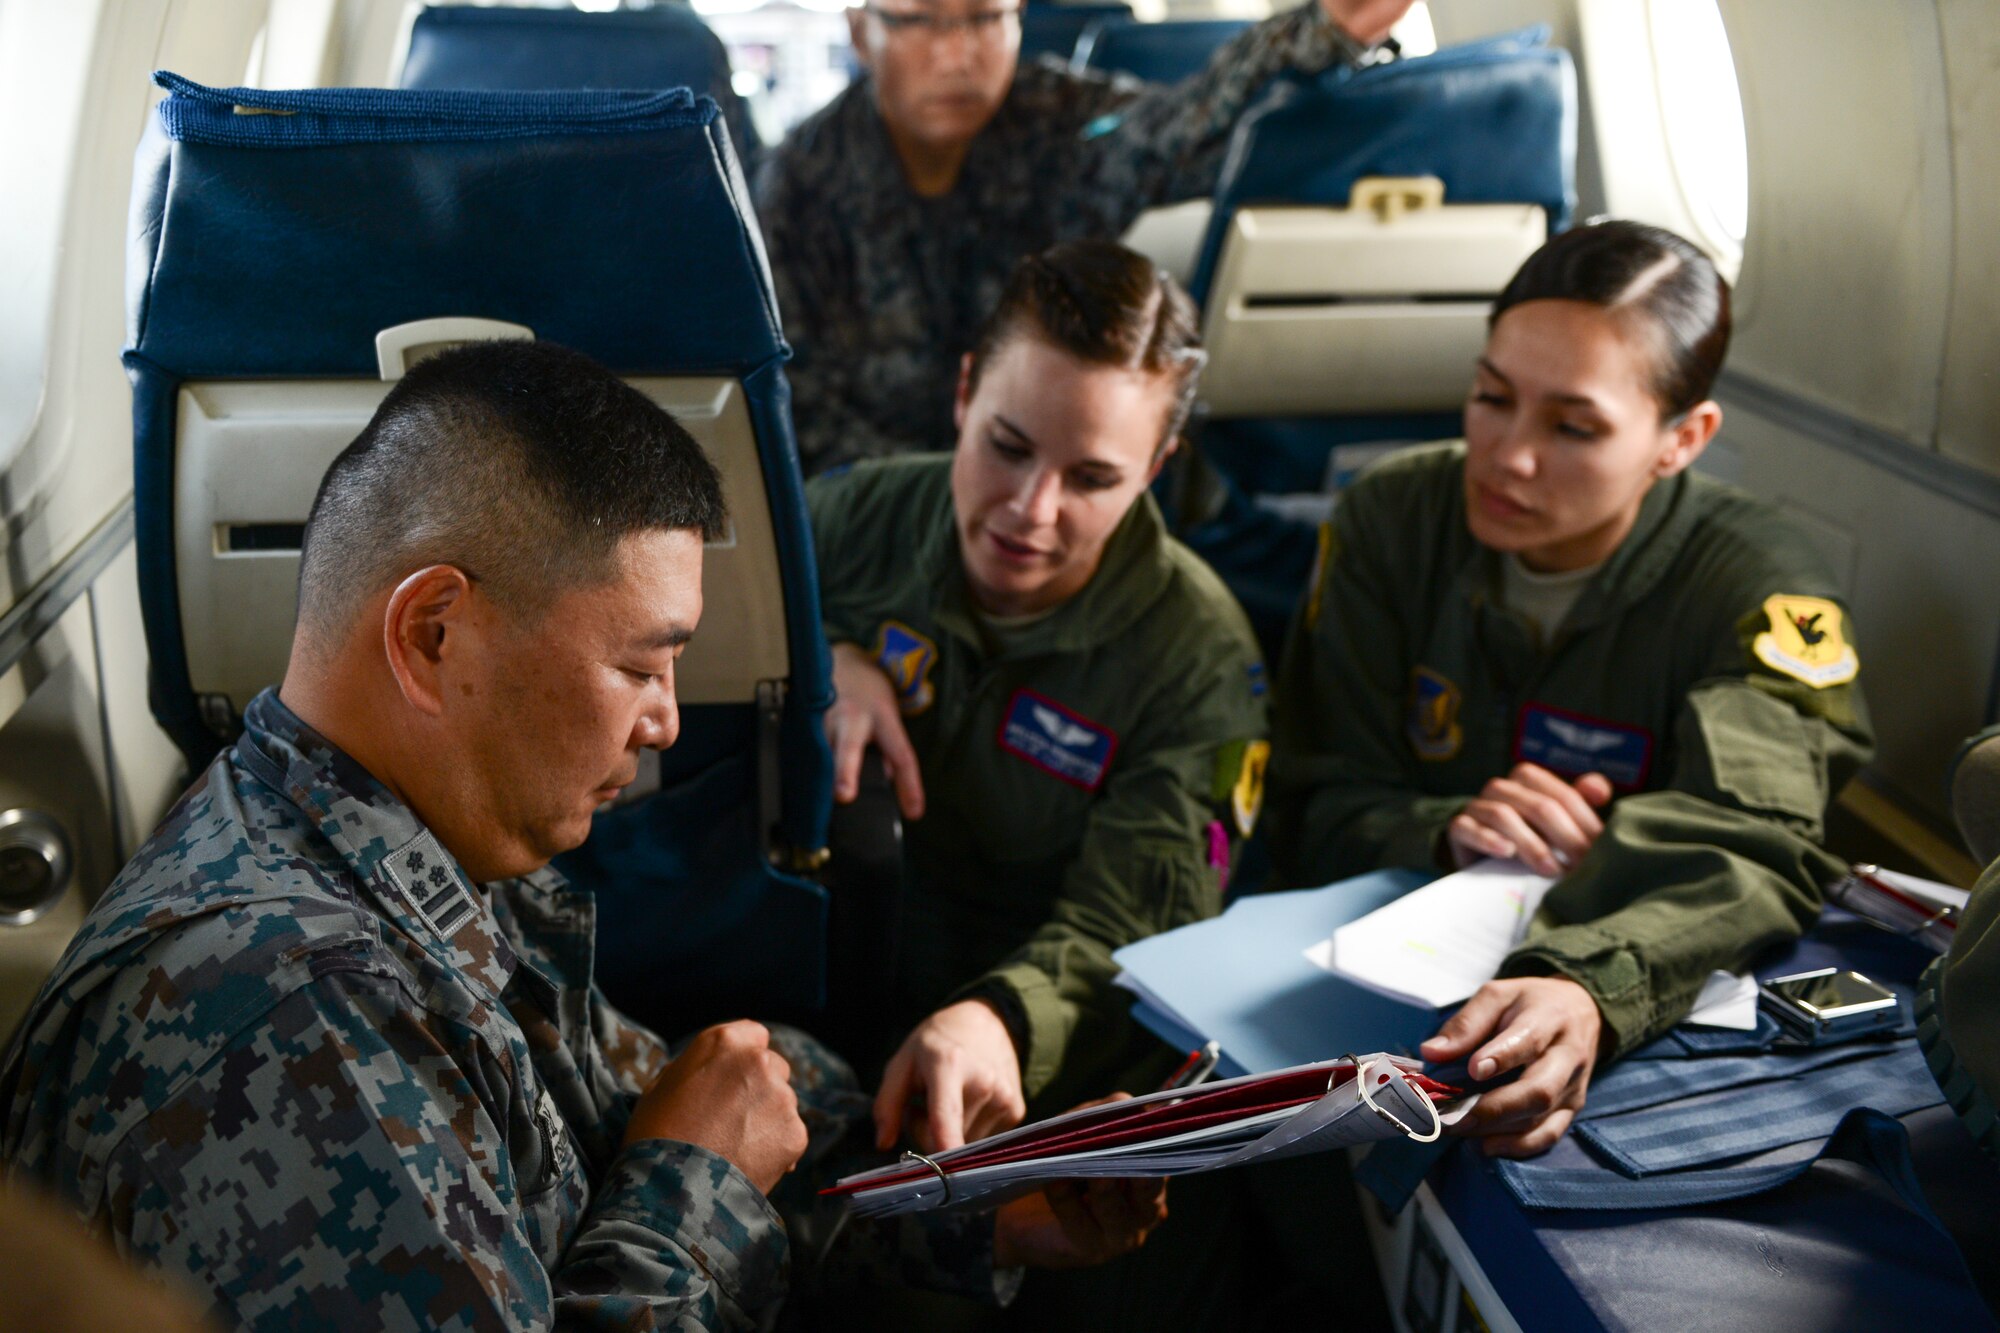 Japan Air Self-Defense Force Col. Tetsuya Tsujimoto discusses medical evacuation procedures with U.S. Air Force Capt. Melissa Hendricks while observing the U.S. crew perform medevac training over Kadena Air Base, Japan, Sept. 24, 2014. Tsujimoto and his team flew with the 459th Airlift Squadron to Kadena to observe their C-12 medevac capabilities. (U.S. Air Force photo Cody H. Ramirez/Released)